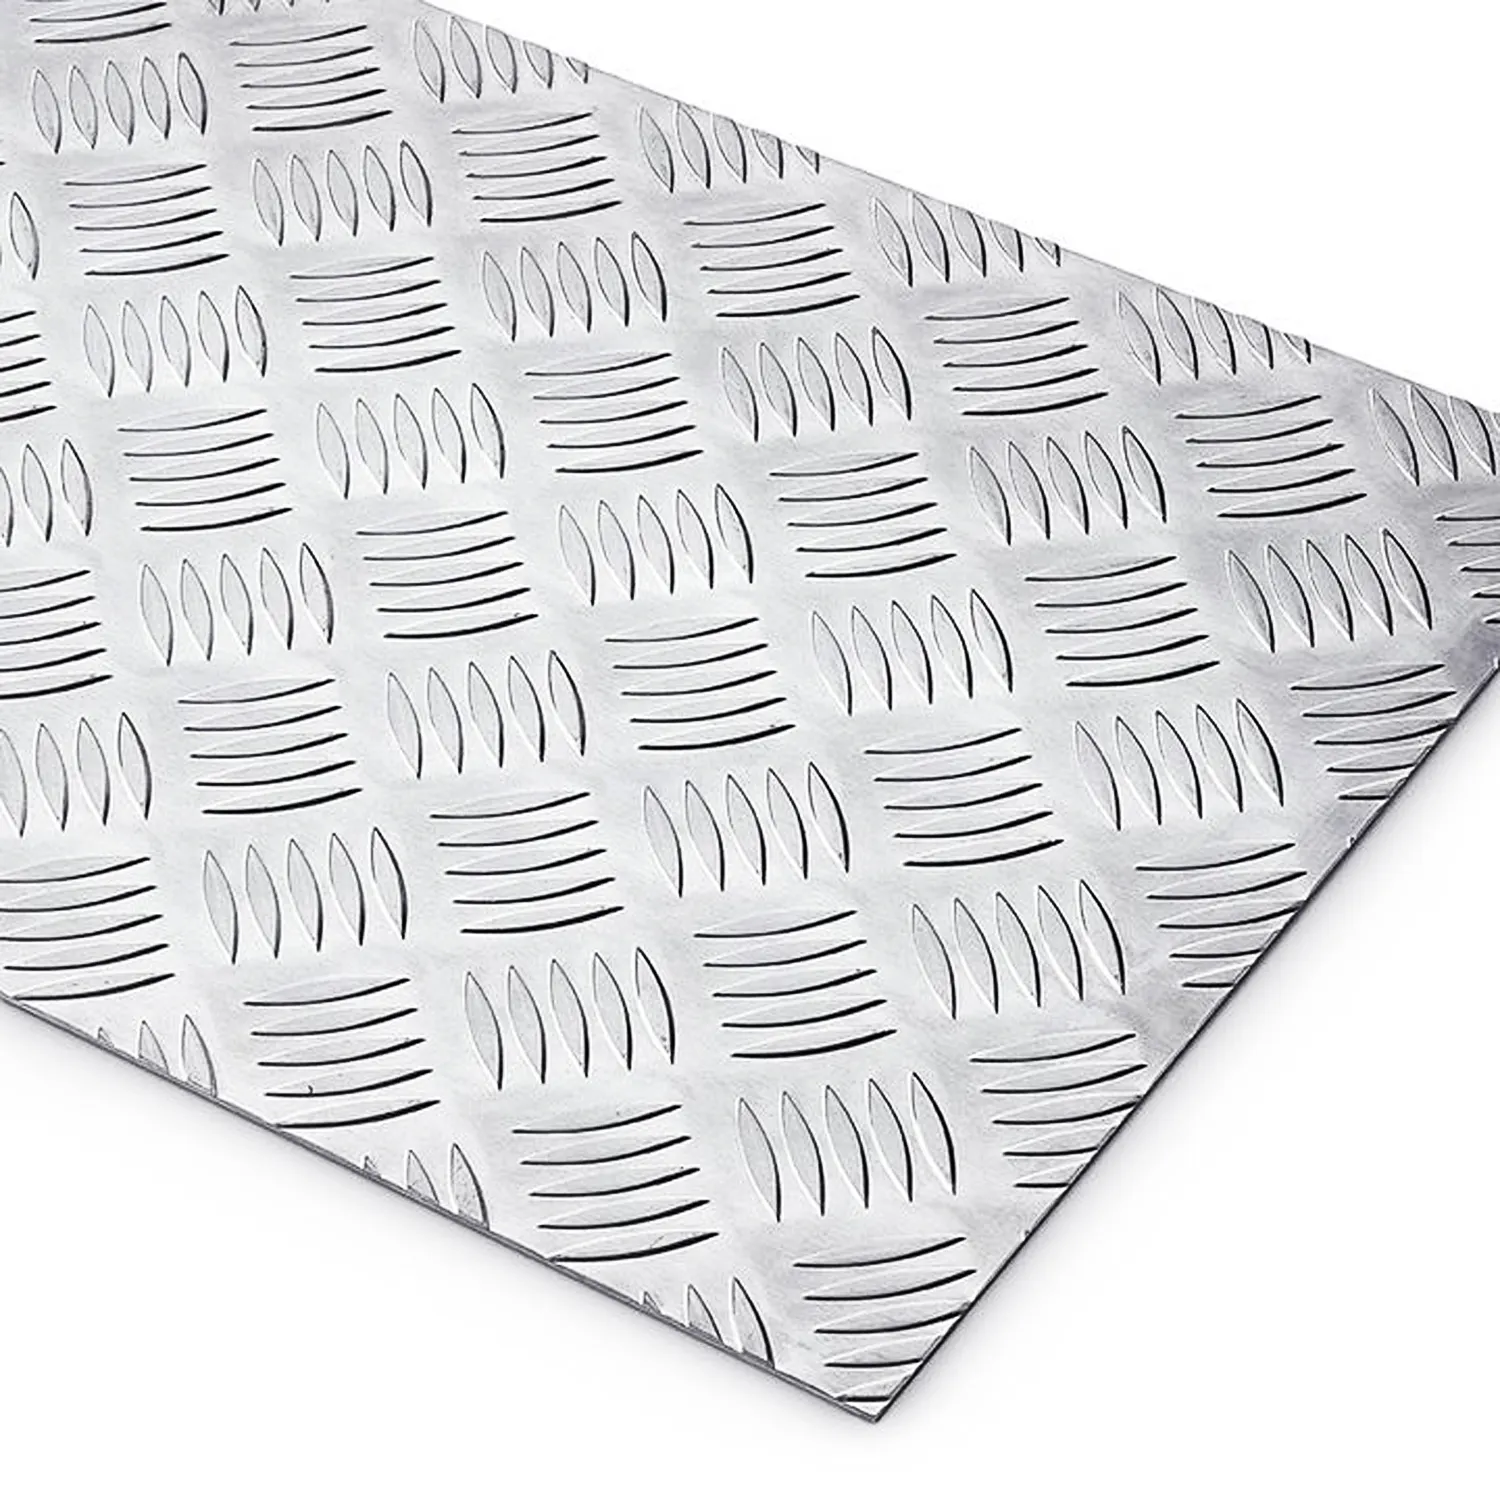 Chequer plate 2000 x 1000mm Sheets Delivered Aluminium Tread plate 